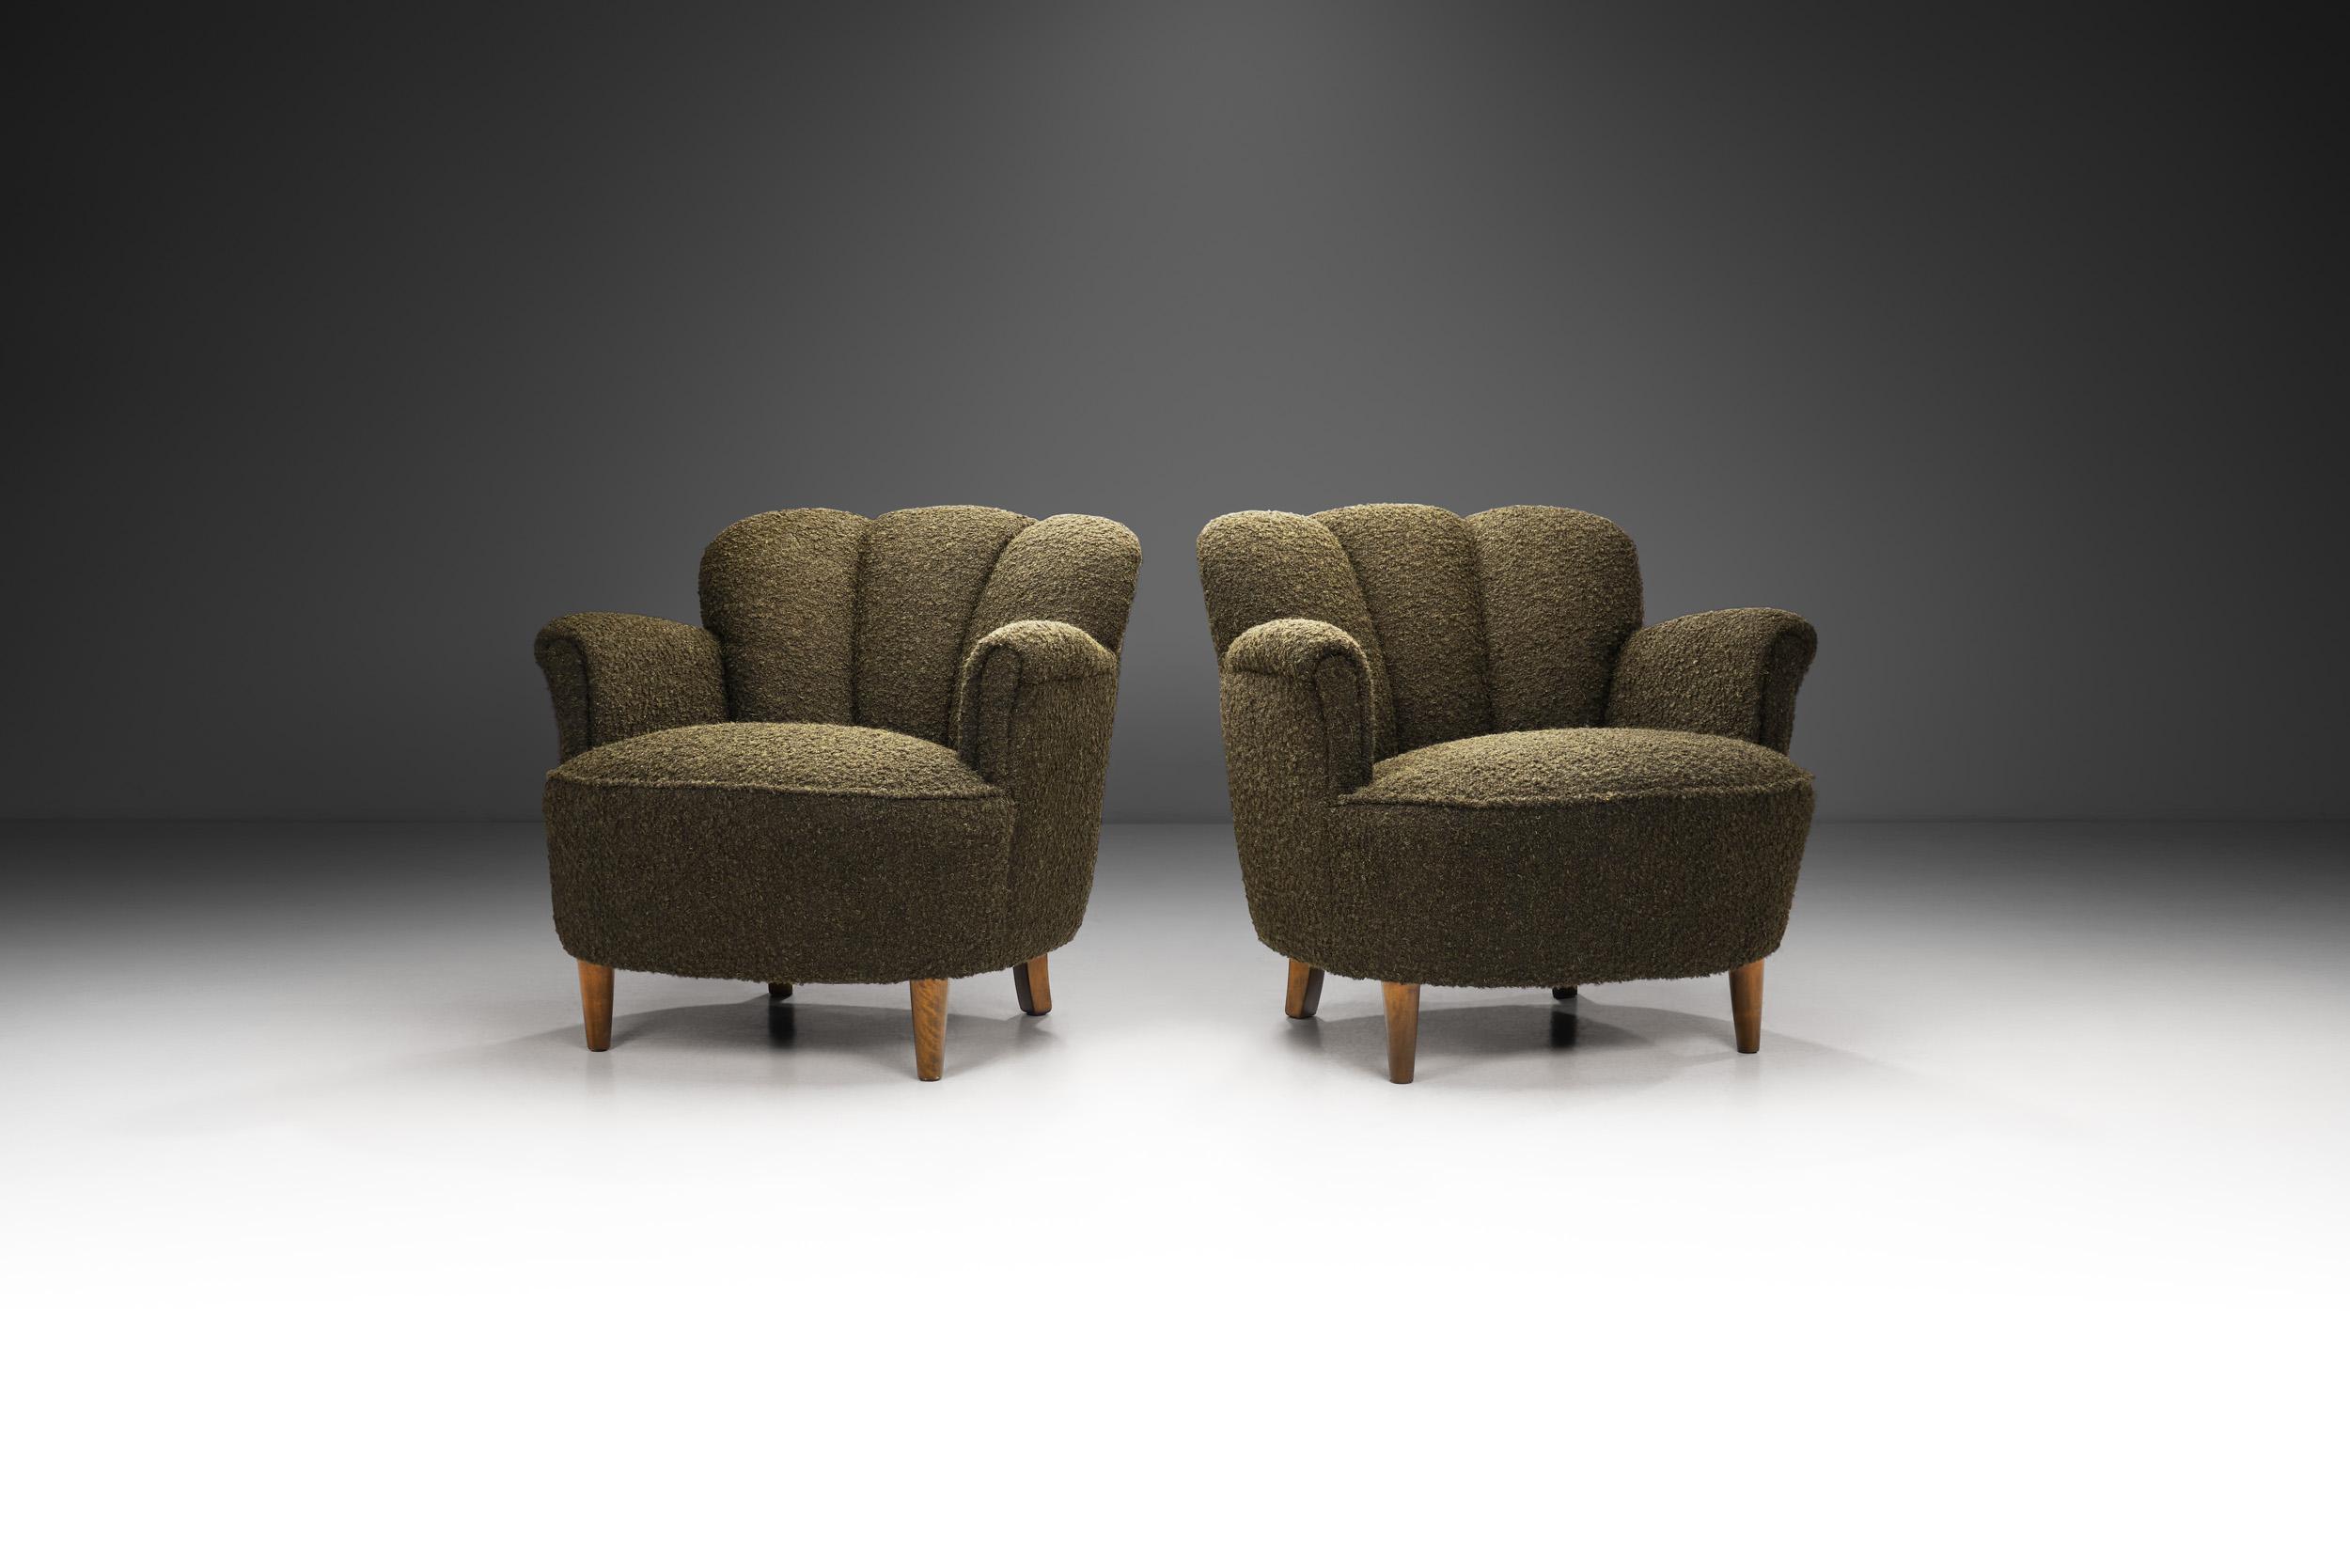 In the design-wise glamorous world of 1930s Europe, exceptional seating pieces emerged and still embody Art Deco elegance. These lounge chairs, with their distinctive features, exude the spirit of the era and remain stylish examples of this